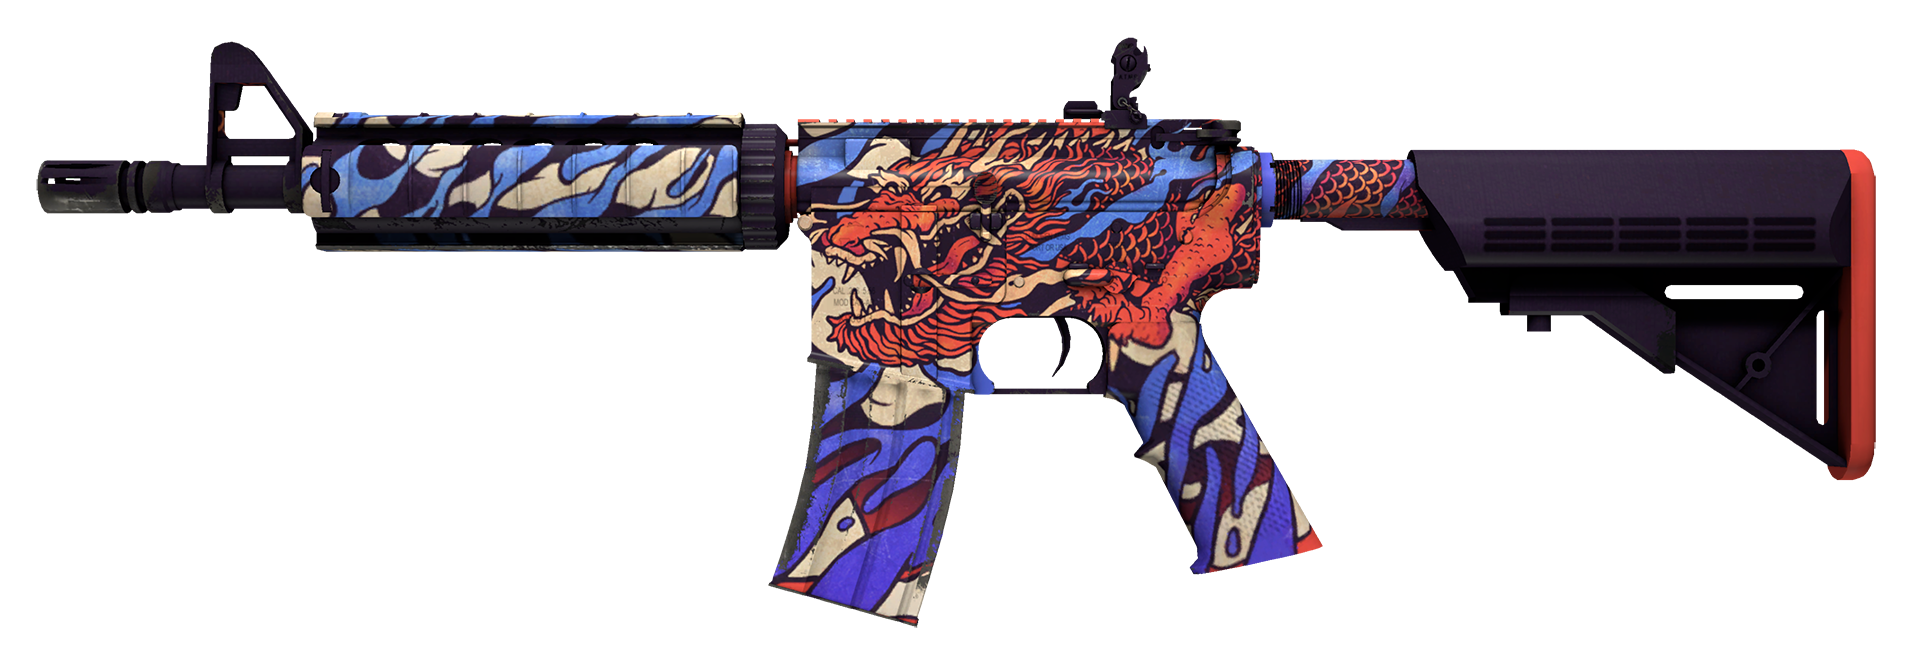 Griffin m4a4 field фото 102